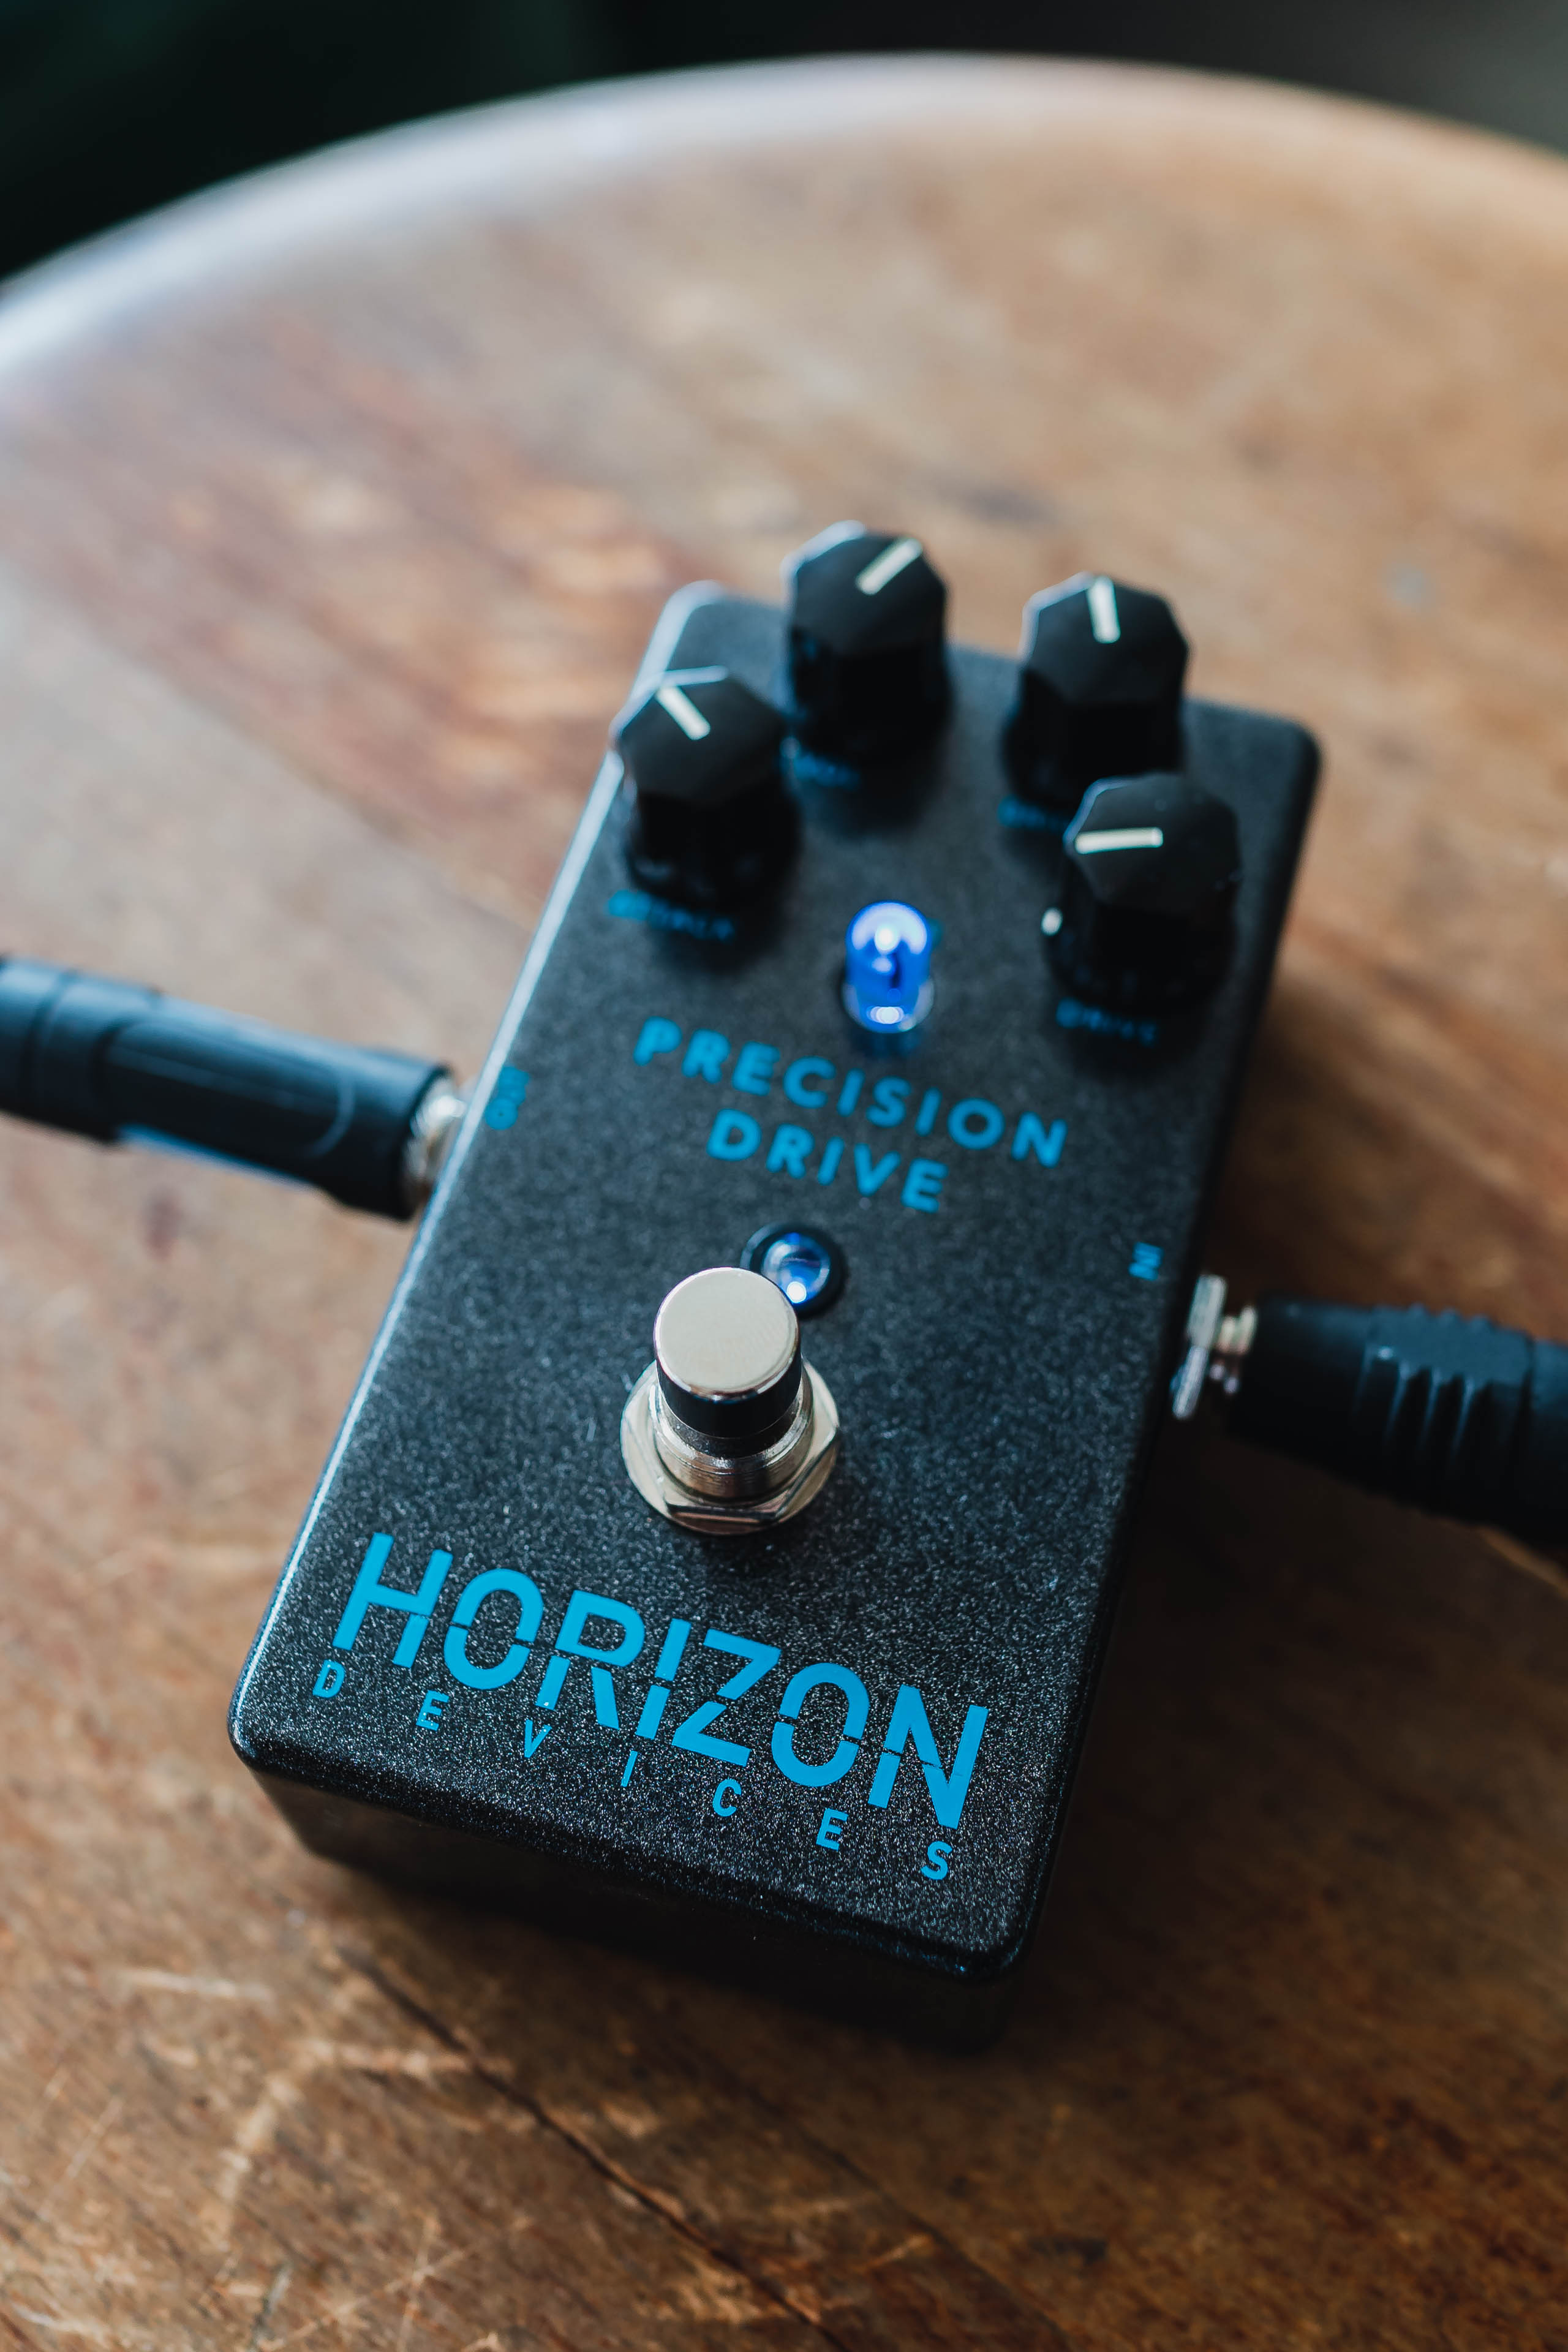 Tag Team Review: Horizon Devices Precision Drive - Extended Range 